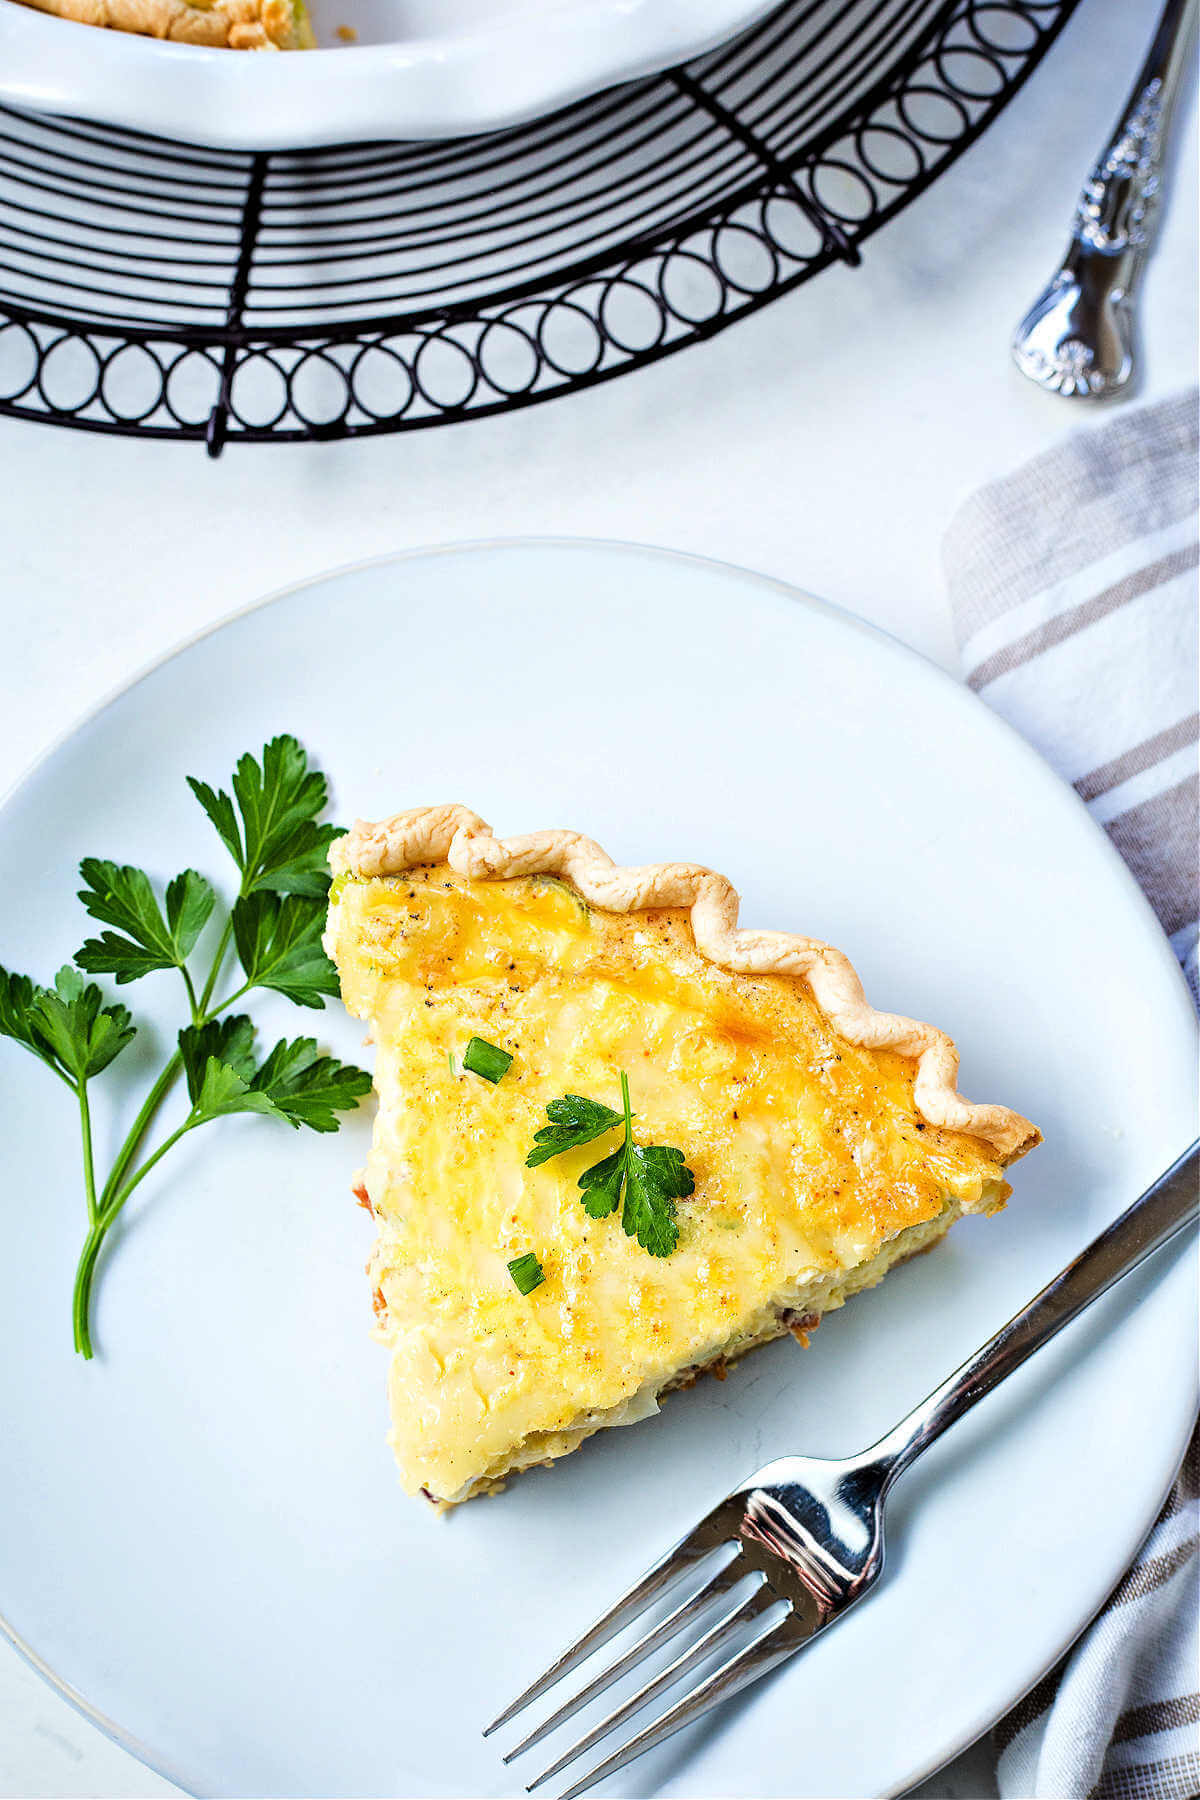 a slice of quiche lorraine on a white plate with a fork garnished with fresh parsley.